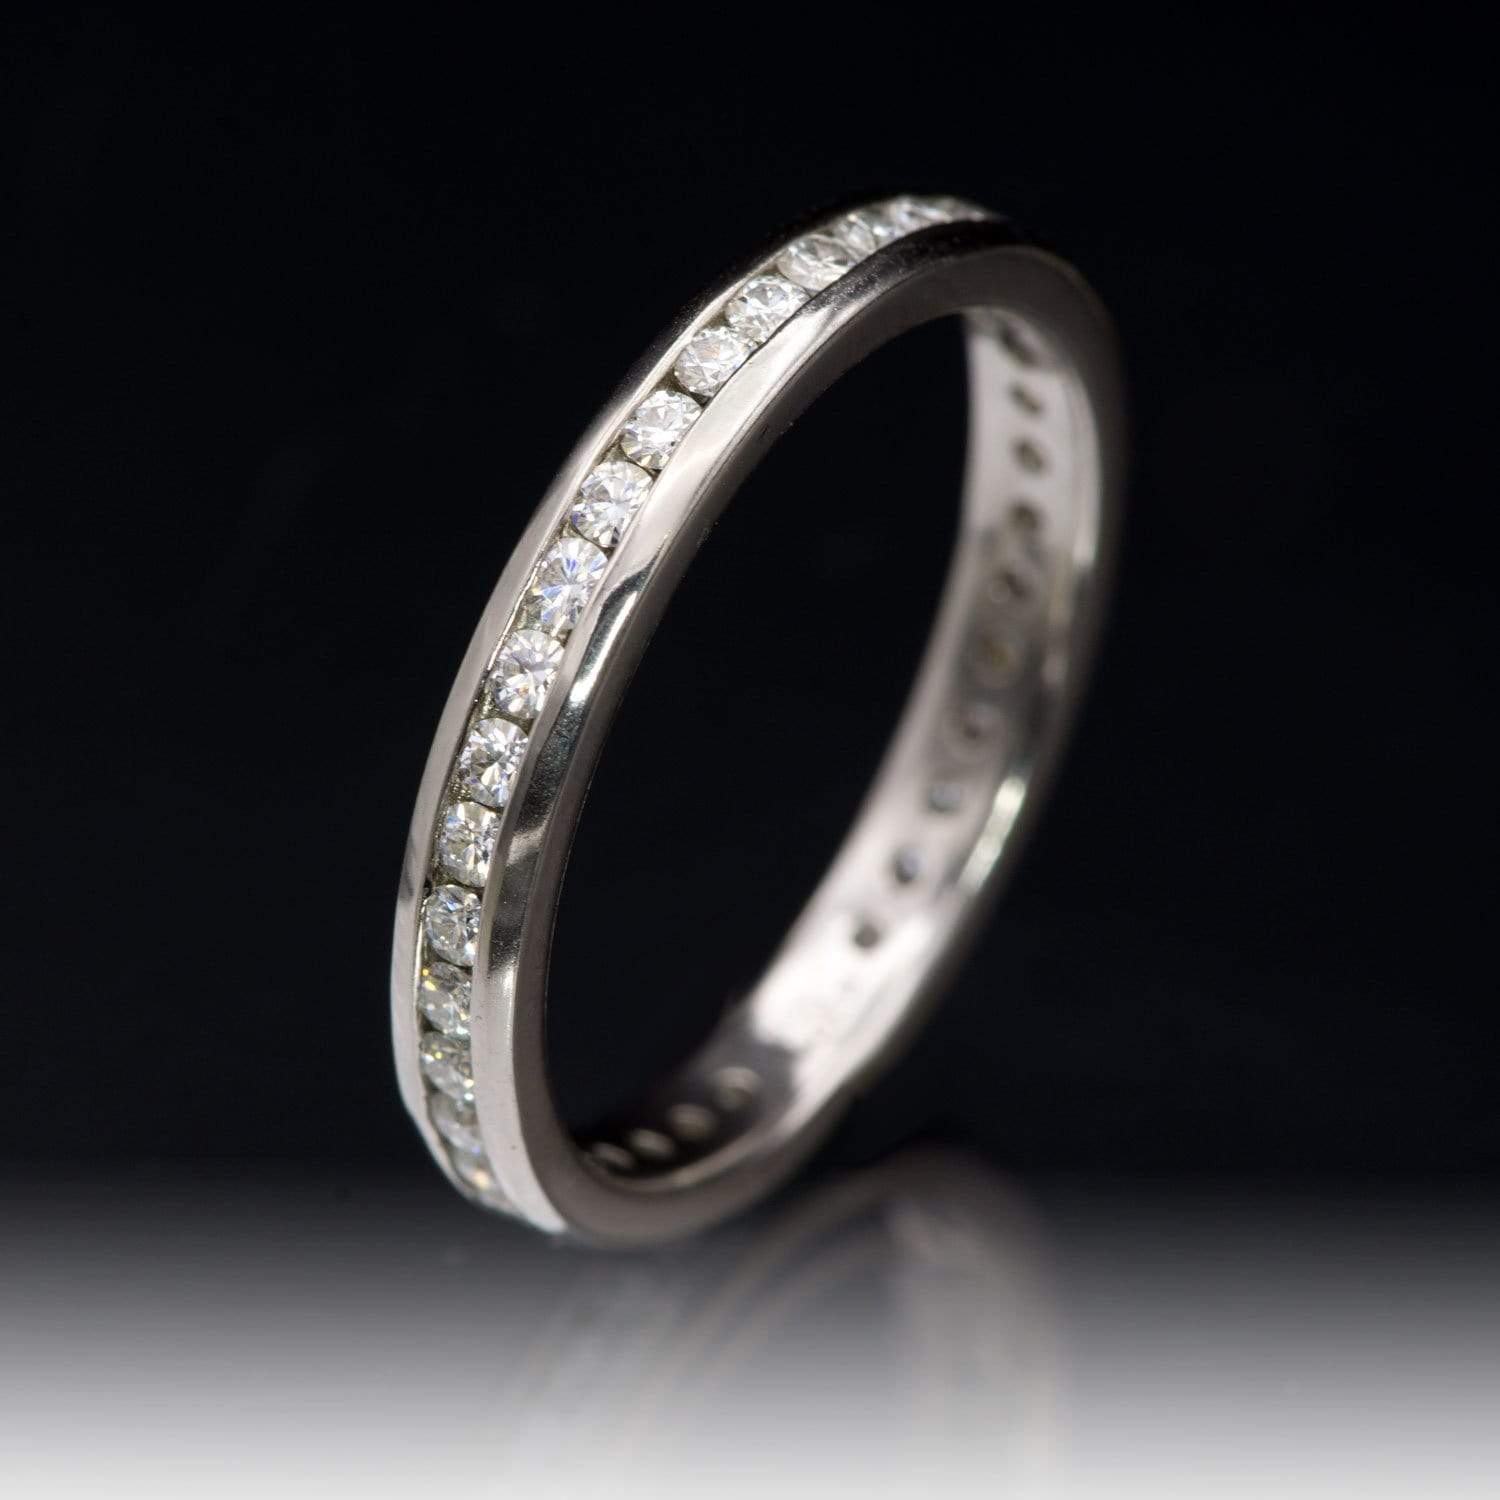 Moissanite Channel Set Eternity Anniversary 14k White Gold Wedding Band, Ready To Ship Size 7.5 Ring Ready To Ship by Nodeform